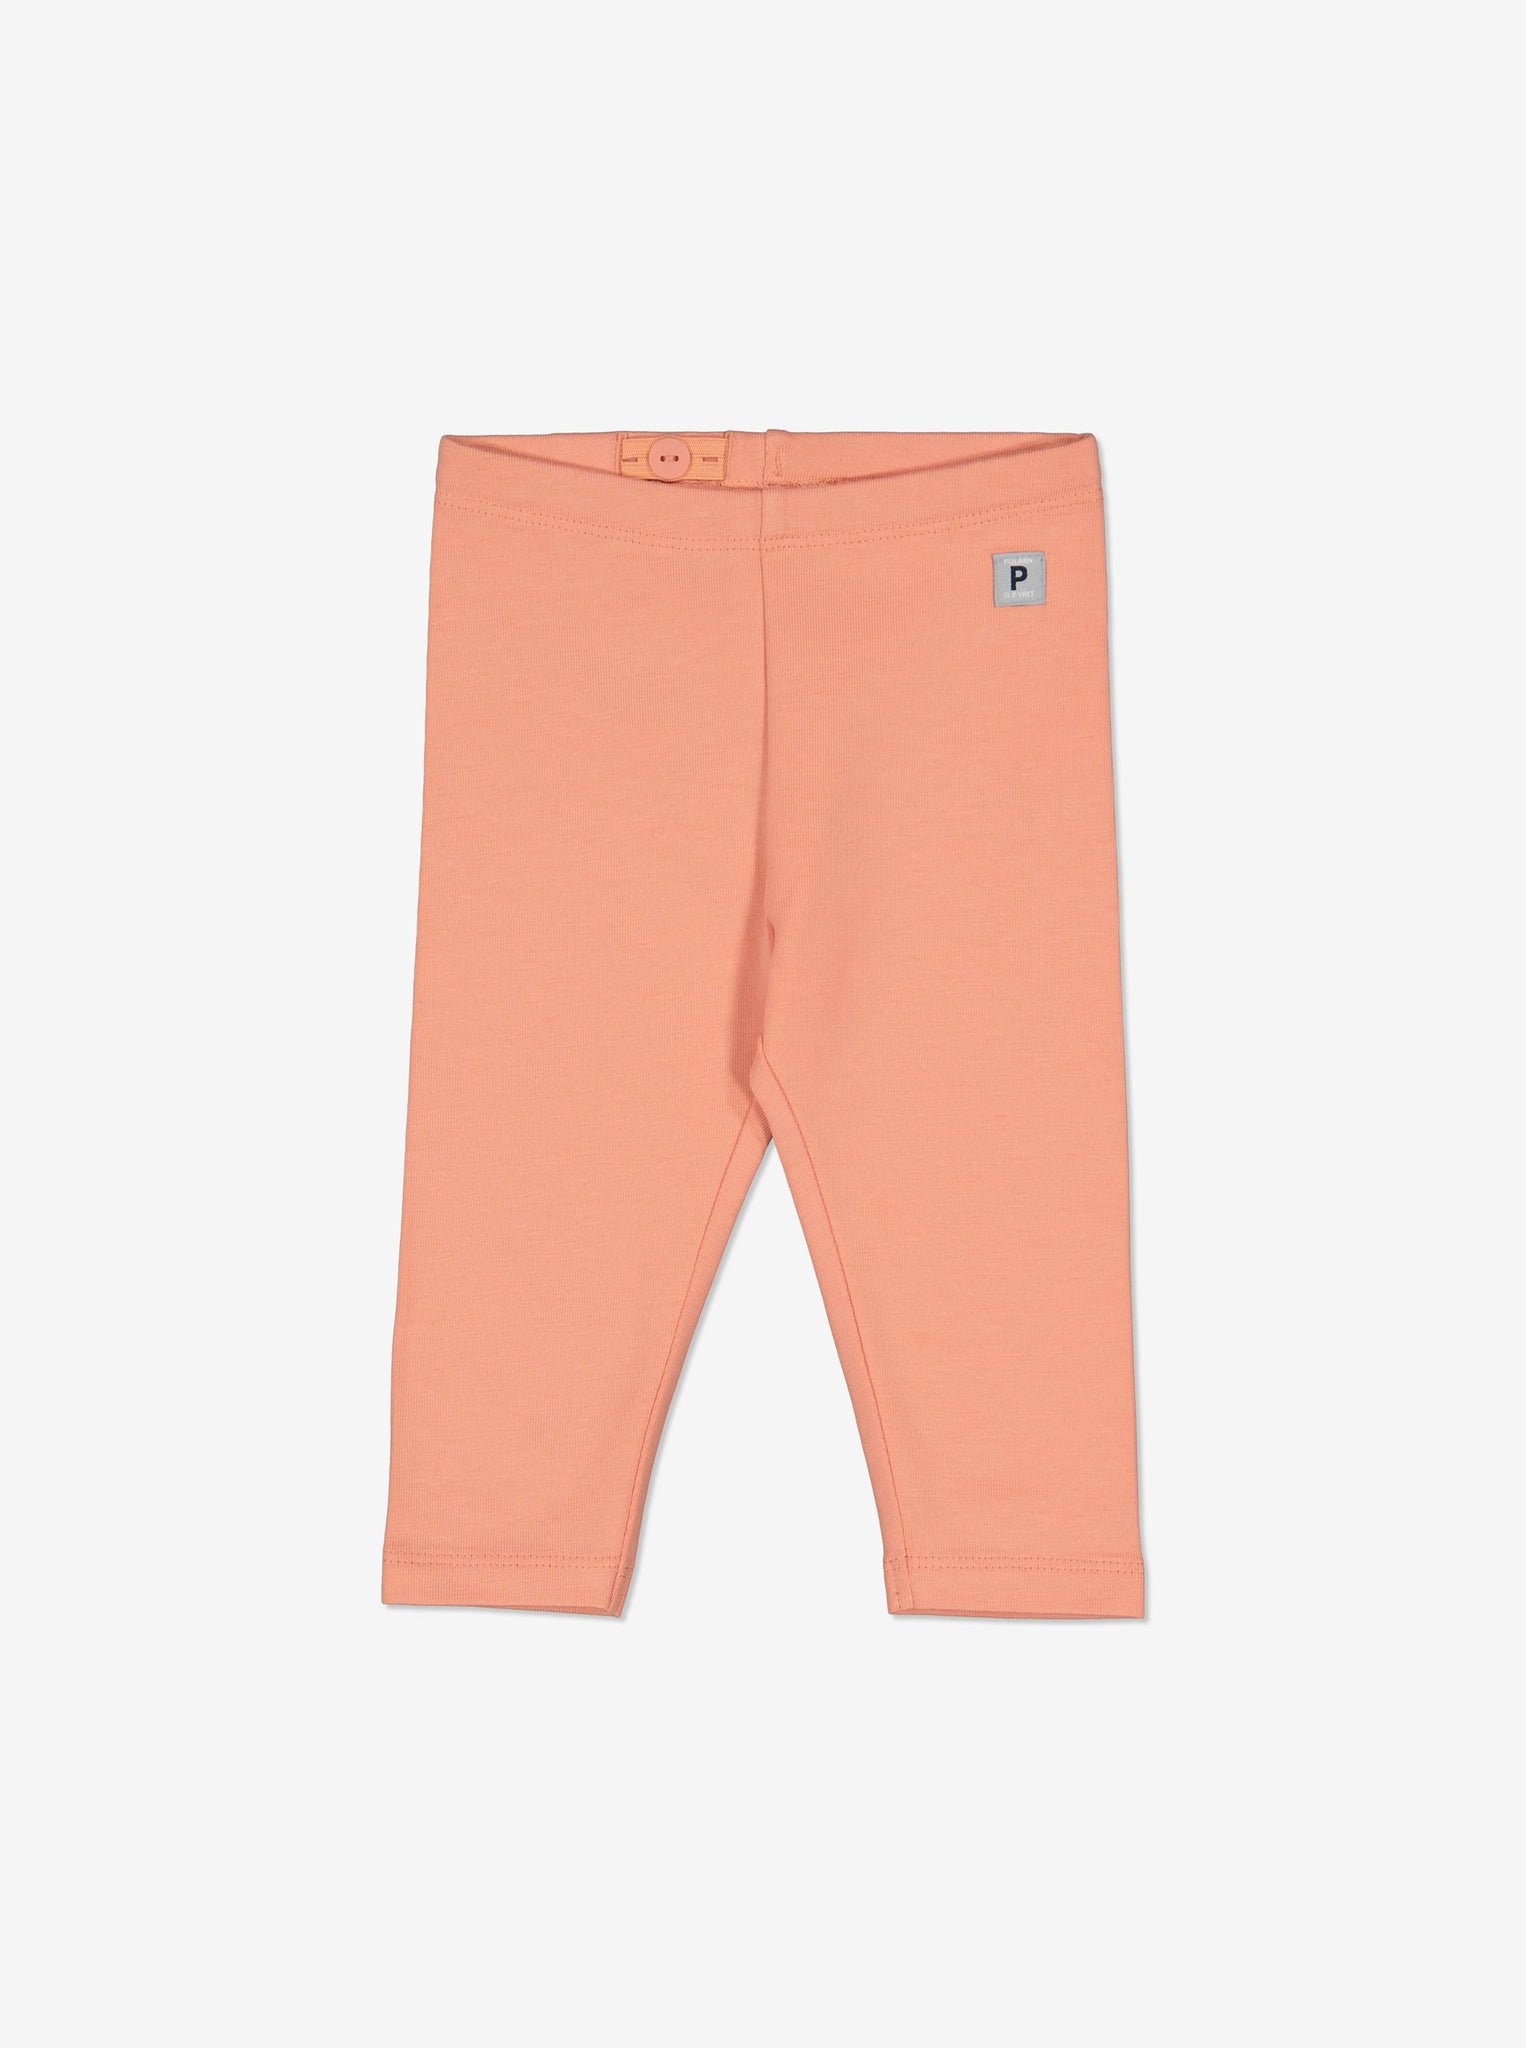 Organic Cotton Peach Baby Leggings from Polarn O. Pyret Kidswear. Ethically made and sustainably sourced materials.